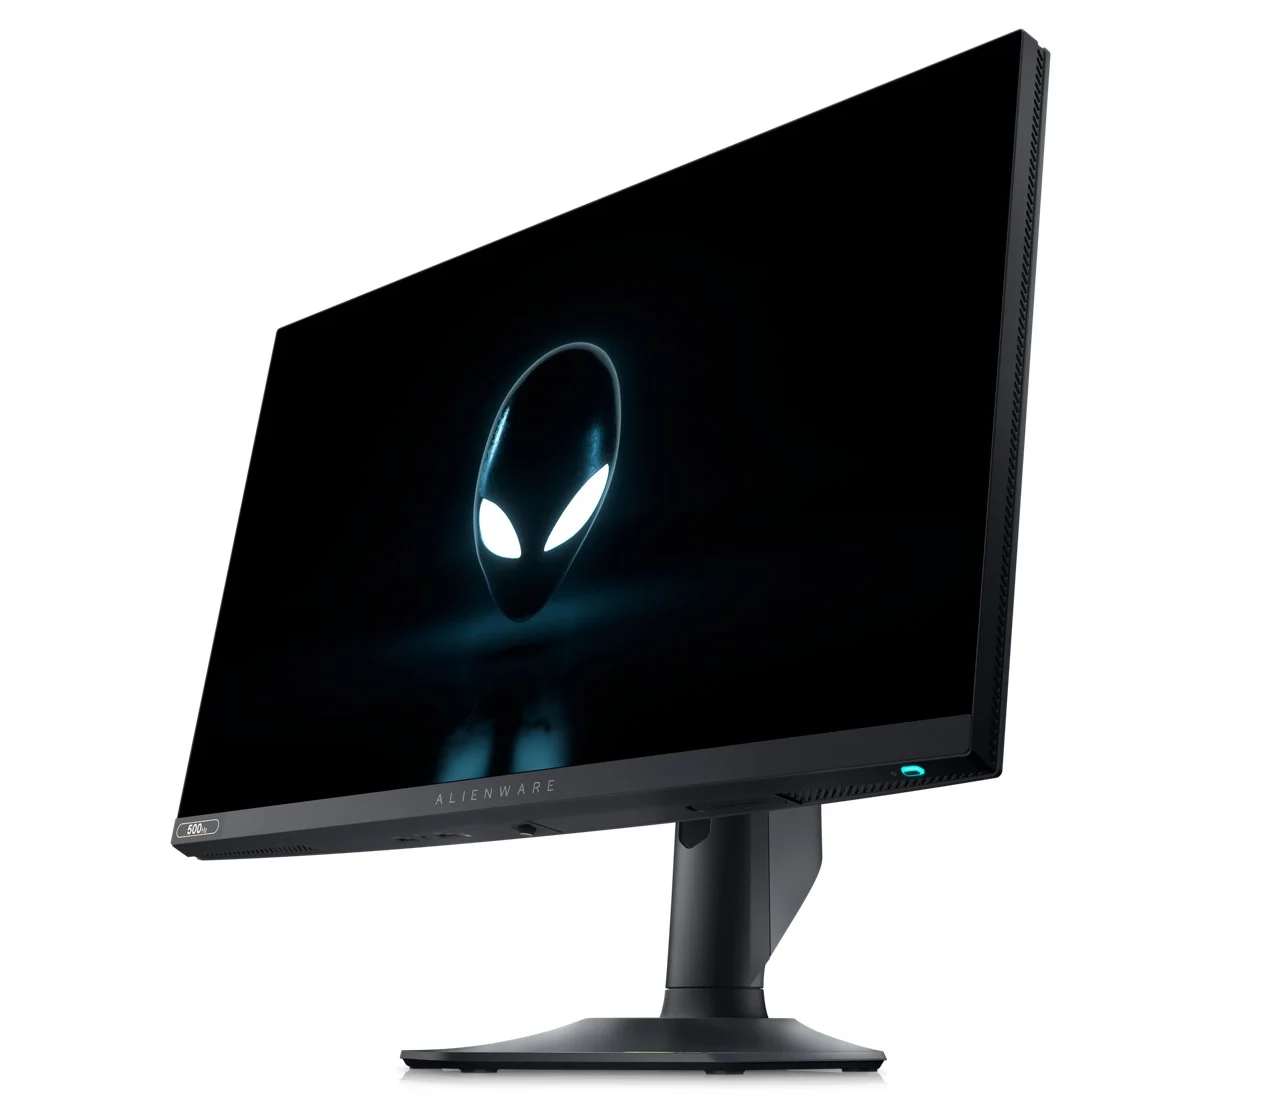 Alienware announces new gaming monitors with up to 360Hz refresh rate